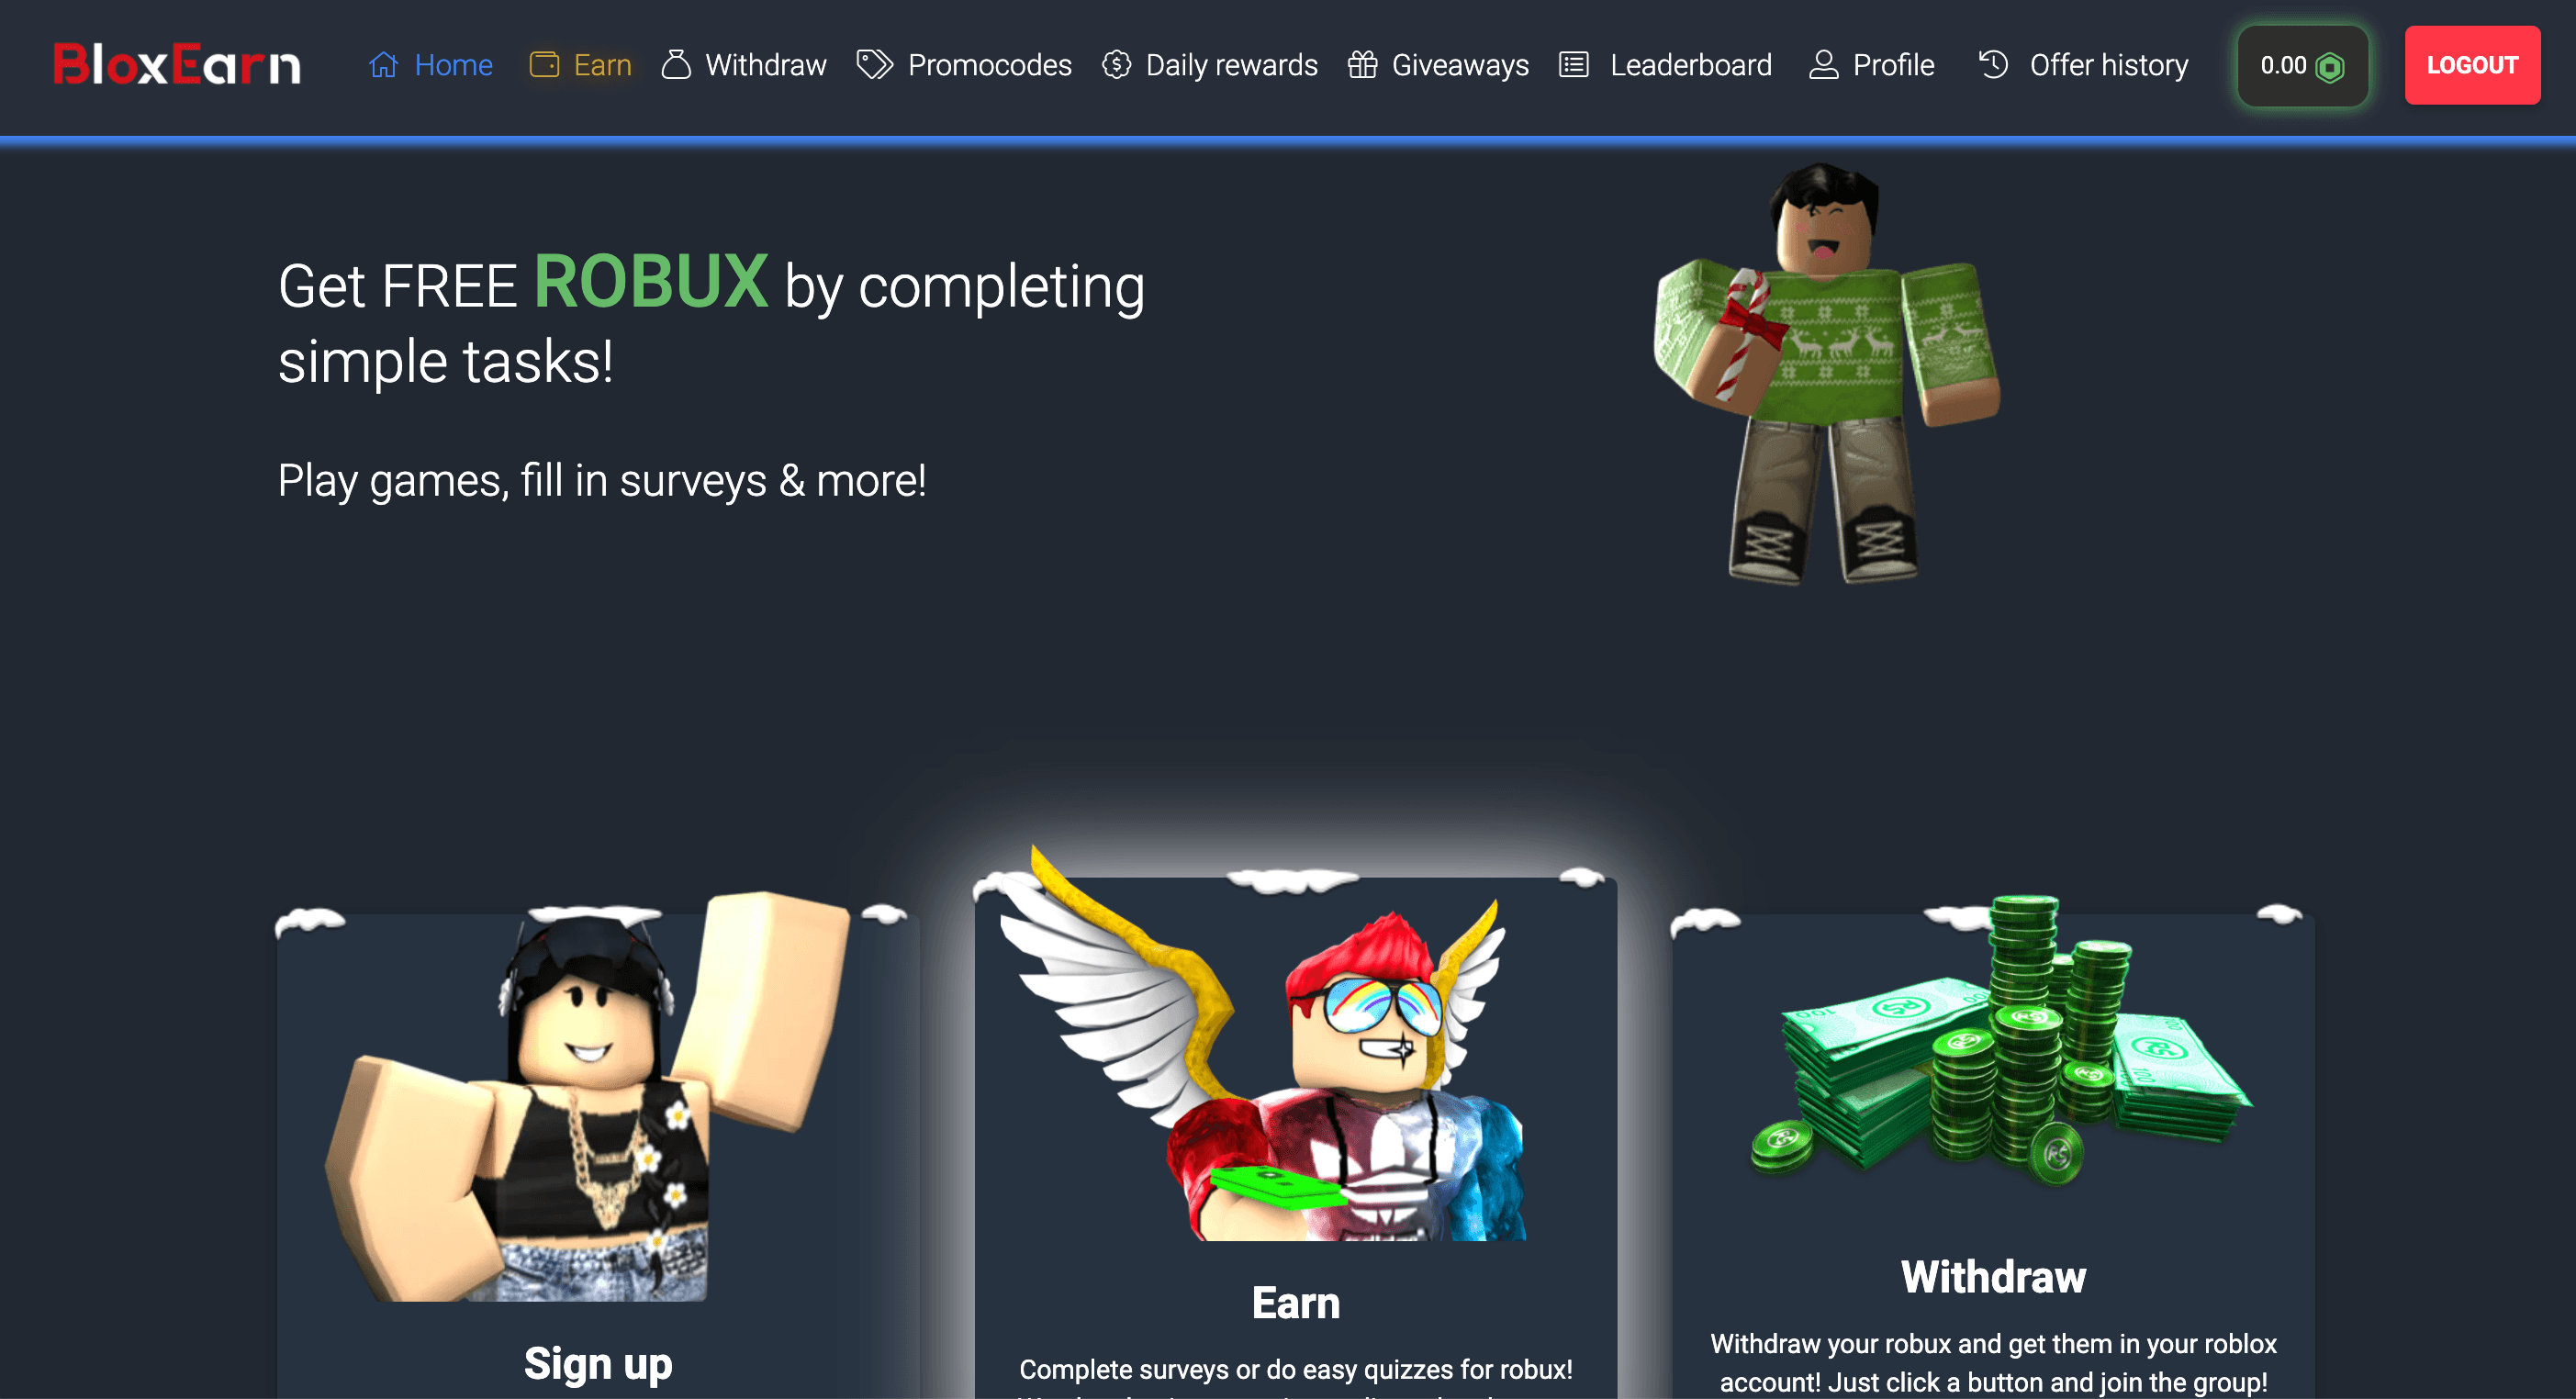 Roblox Promo Codes July 2021 For 1 000 Free Robux Items - free robux for playing games